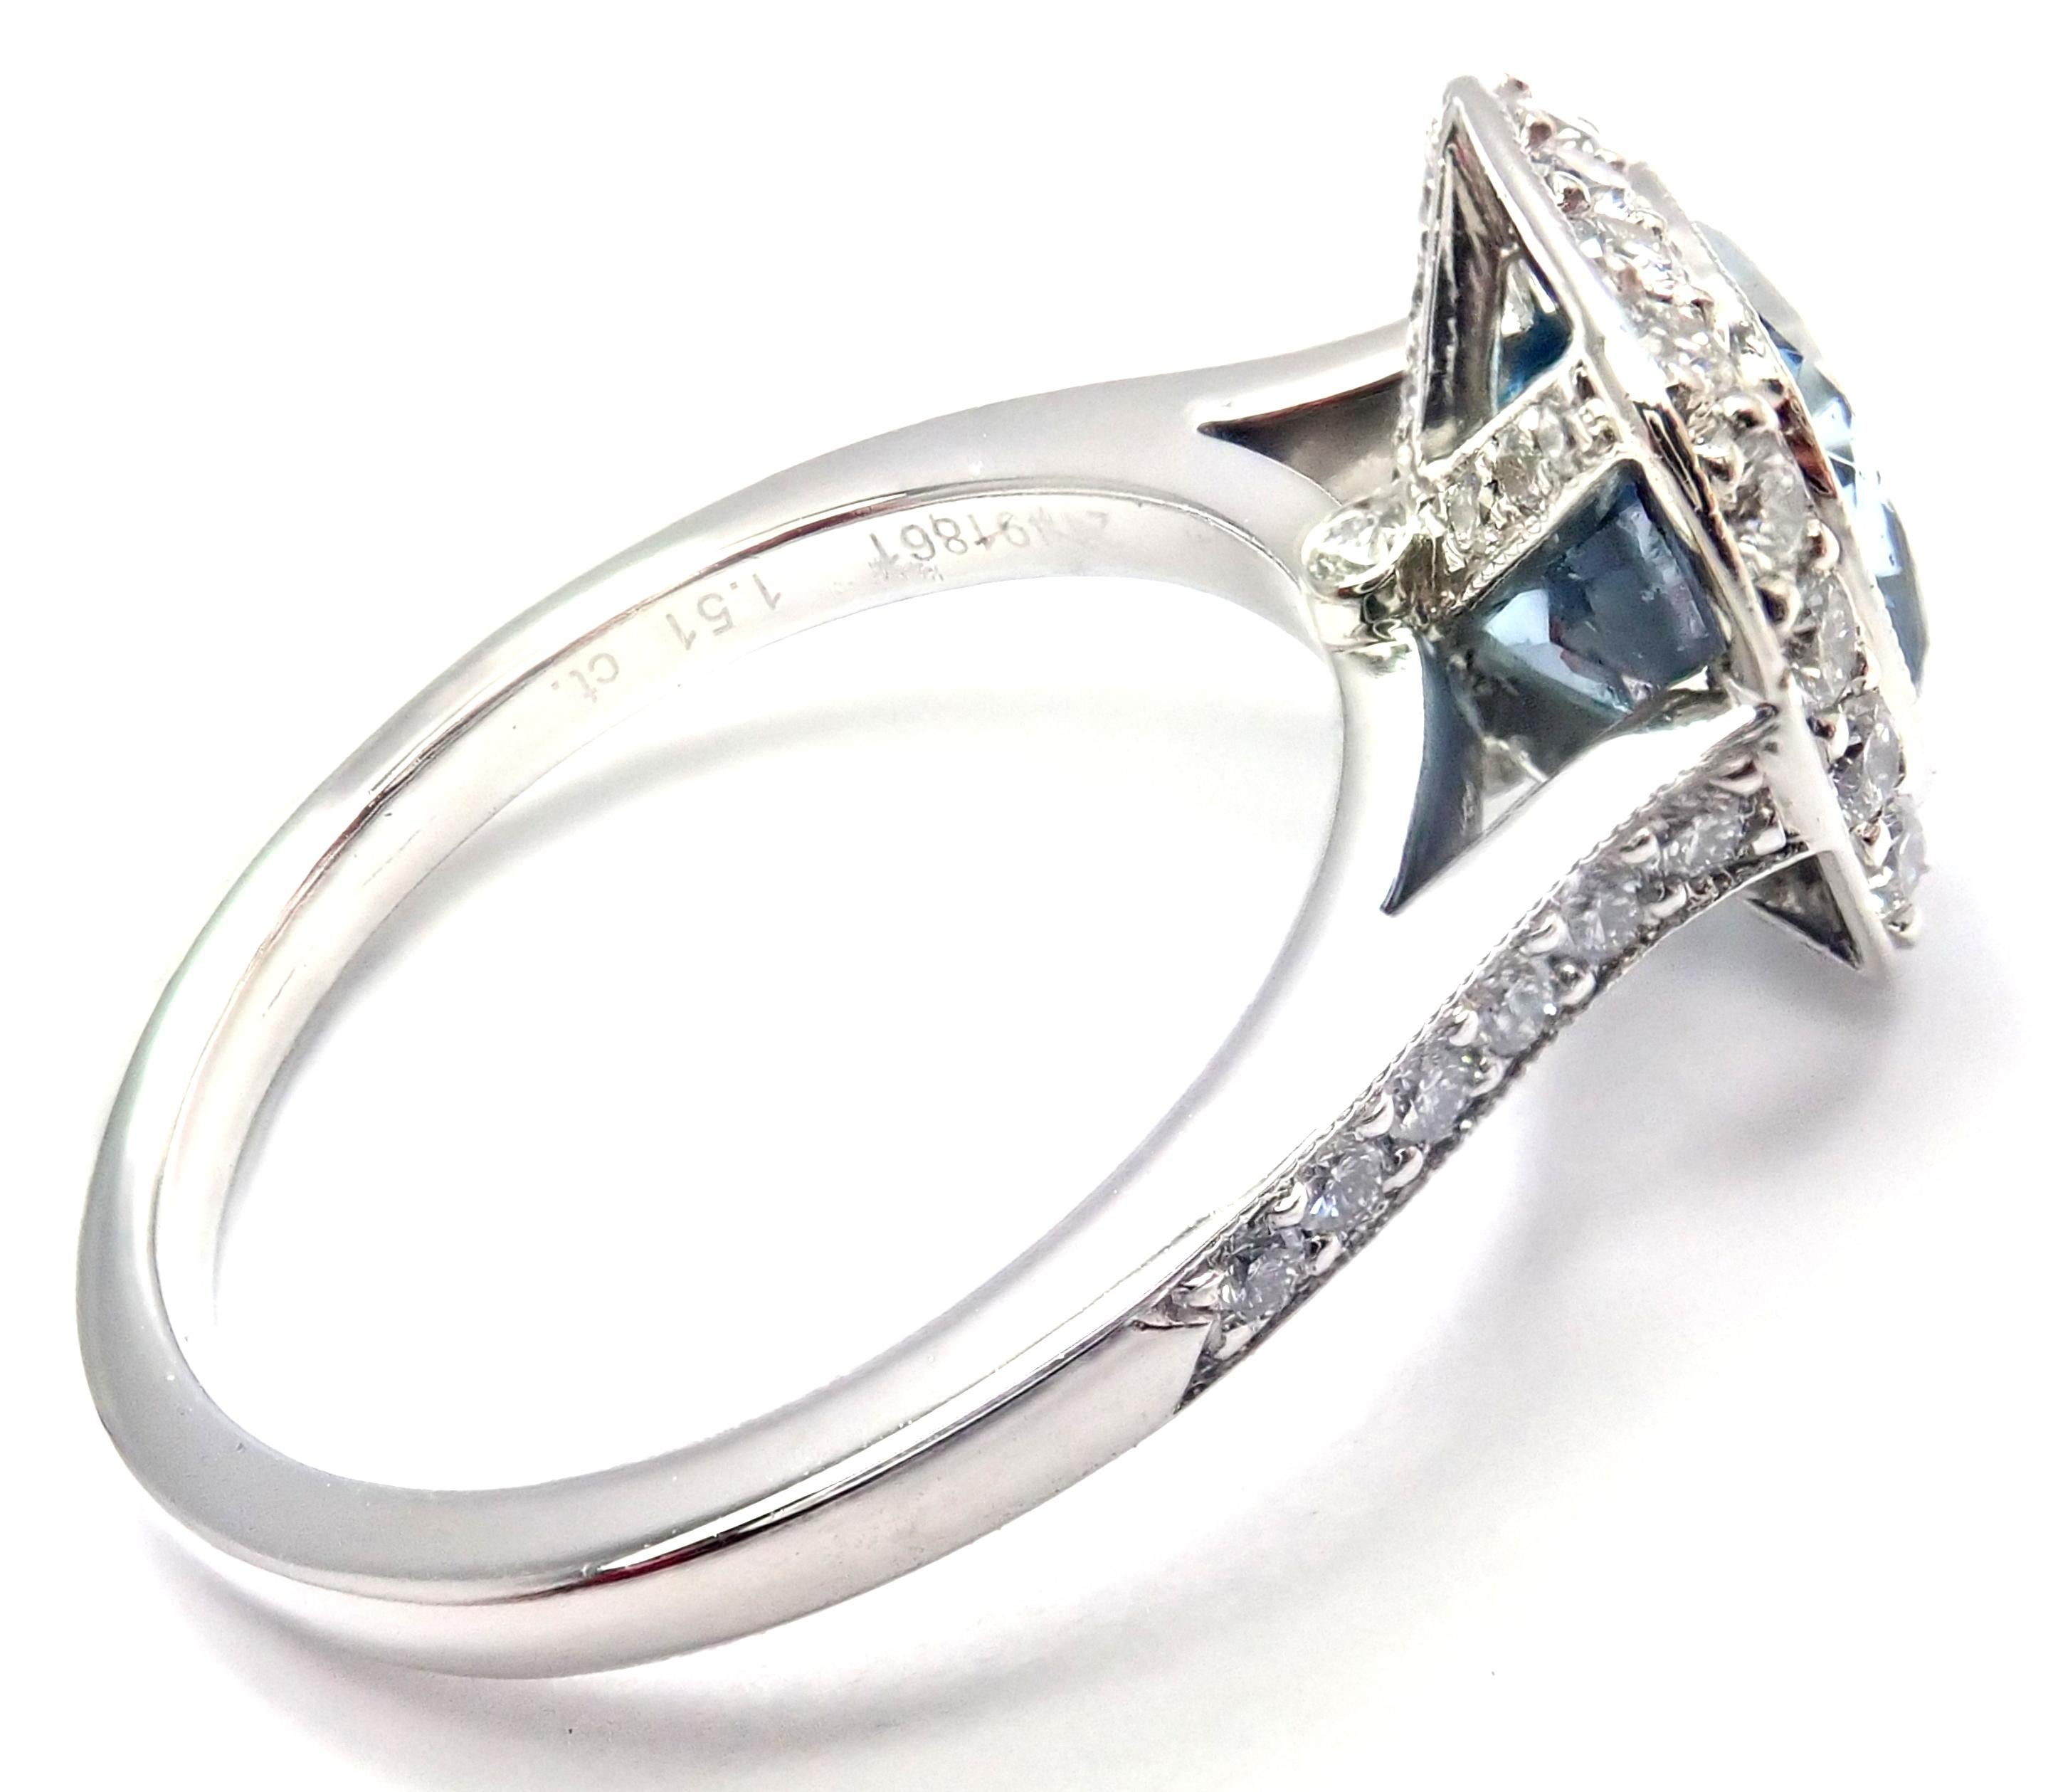 Platinum Diamond And Aquamarine Legacy Ring by Tiffany & Co. 
With Round brilliant cut diamonds VS1 clarity, G color total weight approx. .50ct
1 aquamarine total weight approx. 1.51ct
Details: 
Ring Size: 6
Weight: 6.1 grams 
Width: 15mm
Stamped